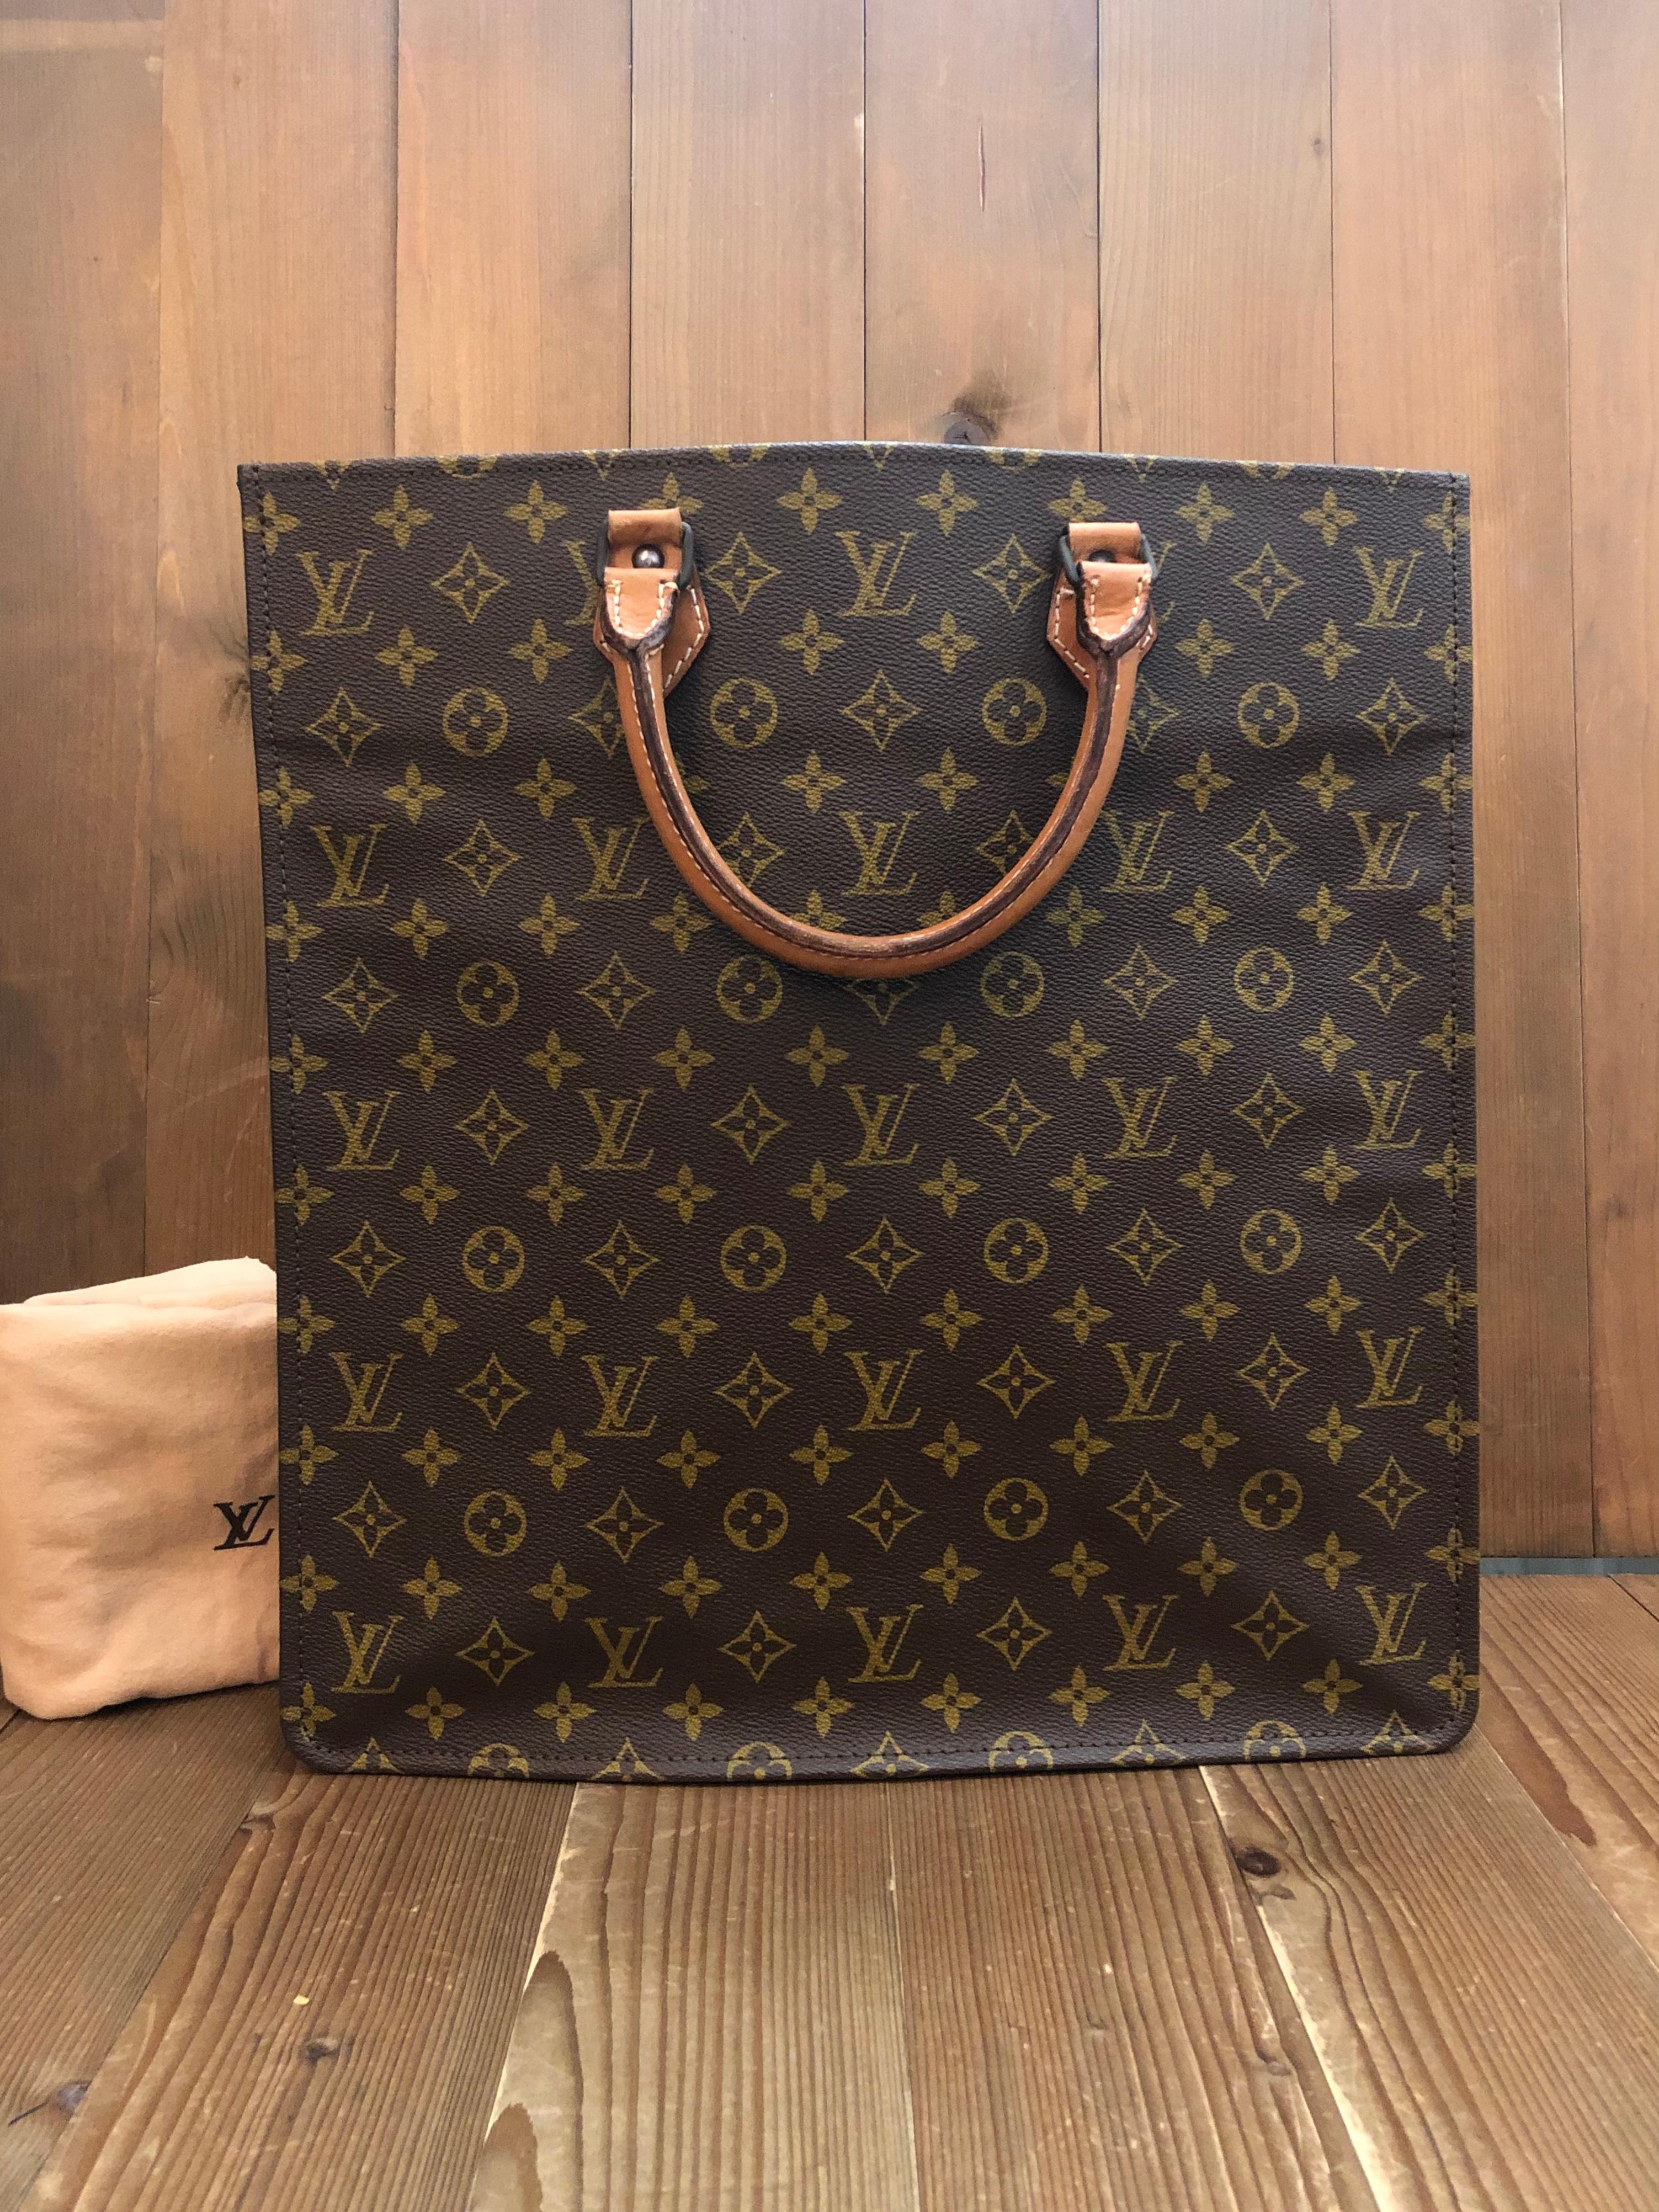 This rare 1970s vintage LOUIS VUITTON Sac Plat is crafted of Louis Vuitton’s monogram canvas in brown and vachetta leather featuring brass hardware and exposed seams along the sides to the bottom. Wide top opens to a spacious interior lined with